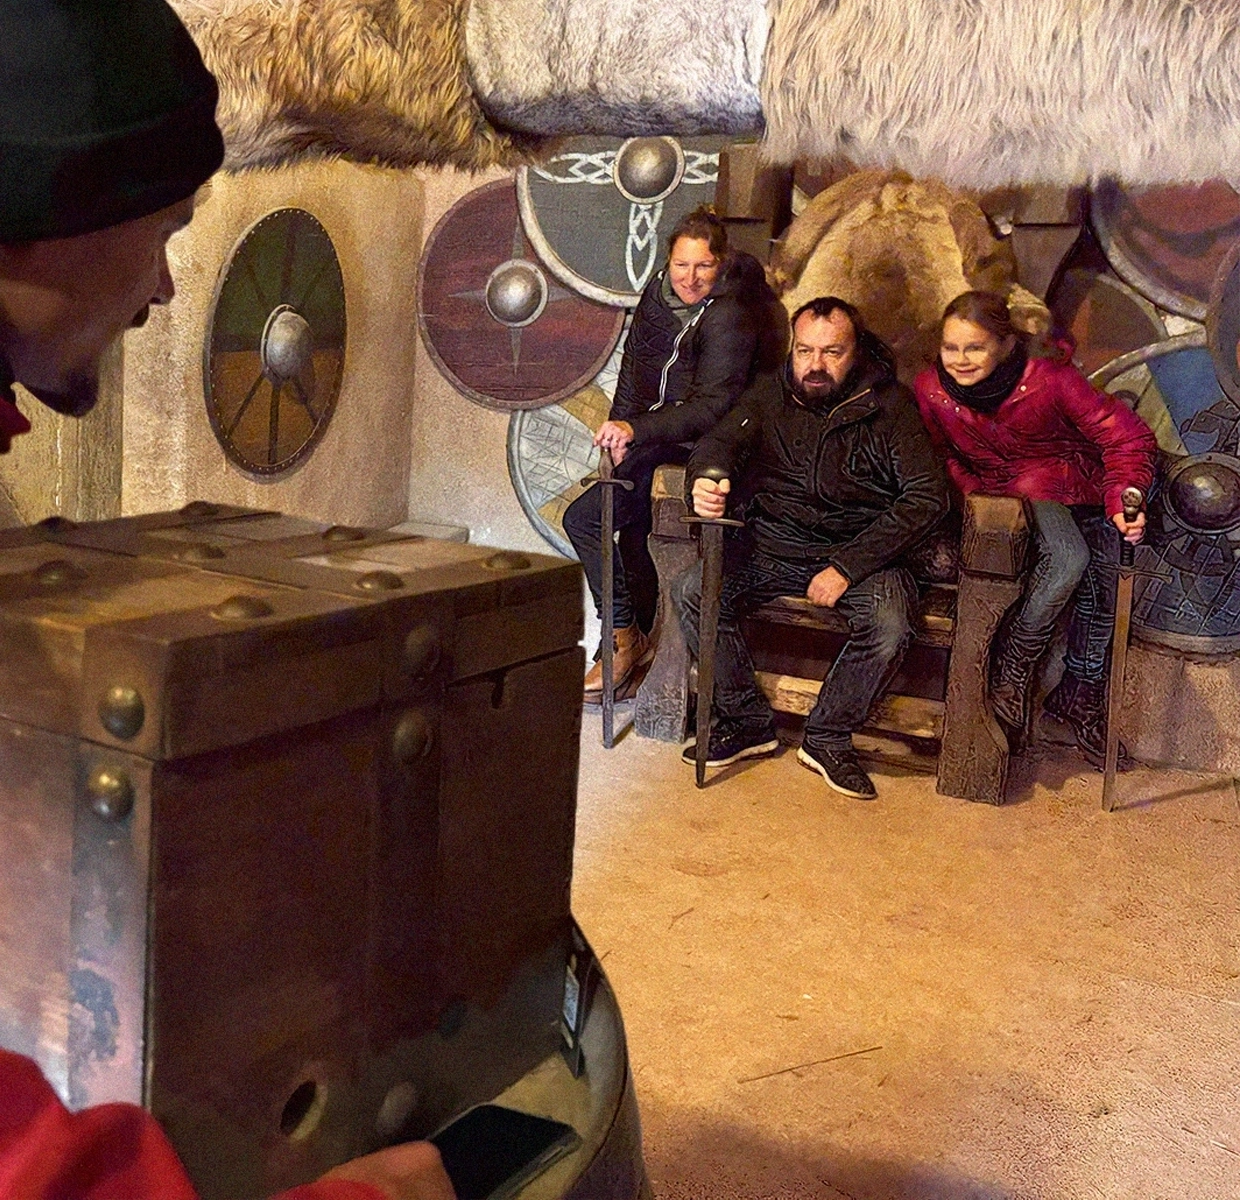 Family enjoying a themed photo shoot at Puy du Fou, with immersive Viking background.